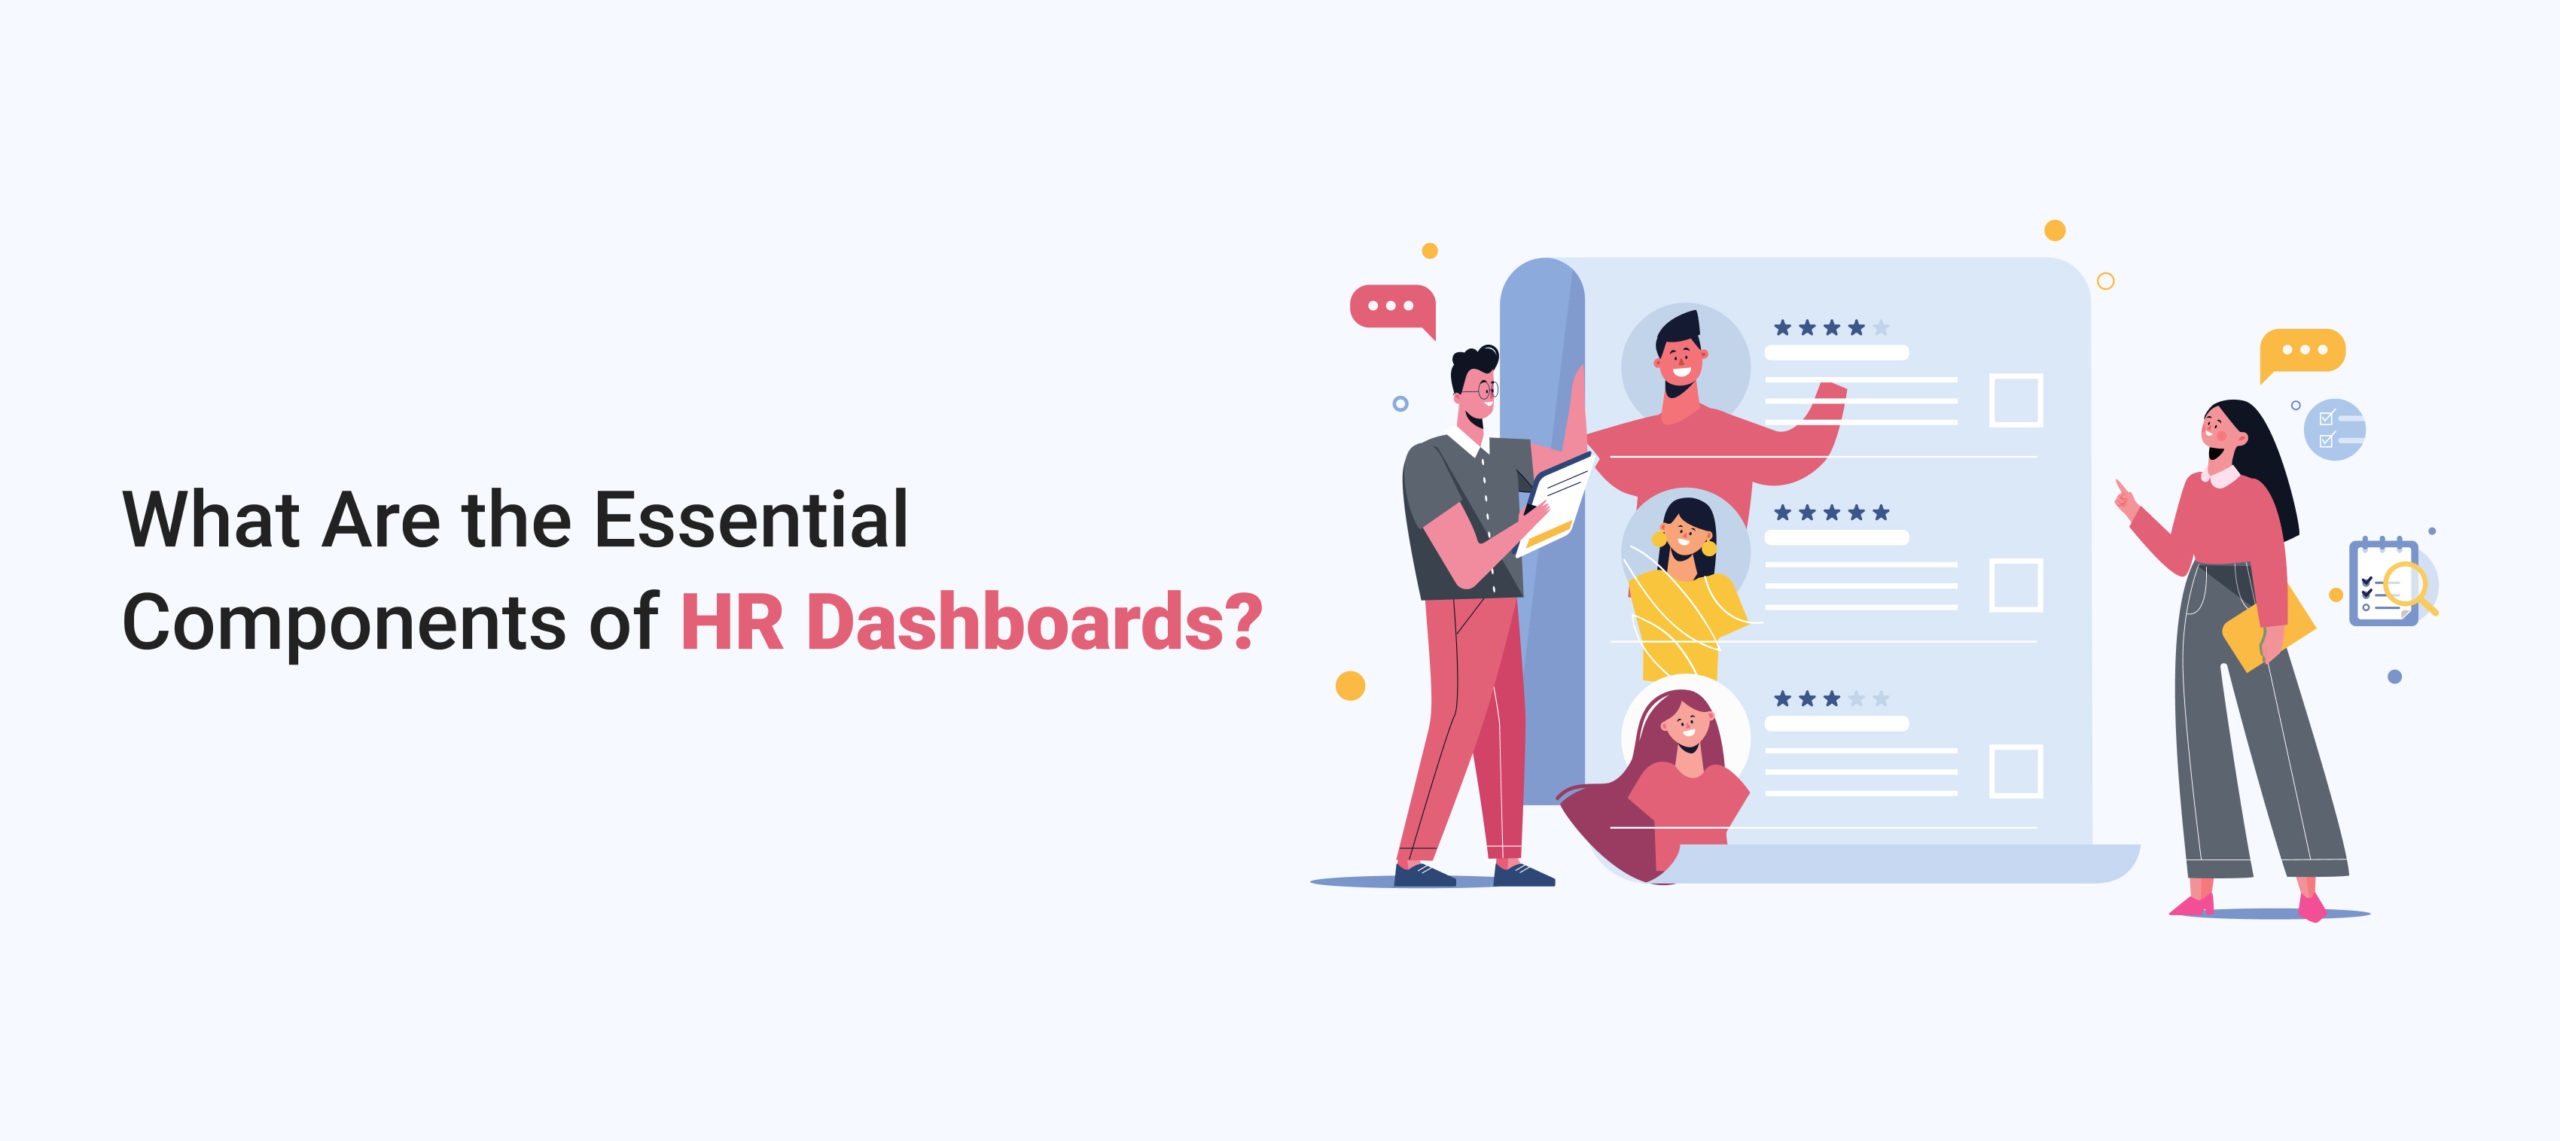  What Are the Essential Components of HR Dashboards?